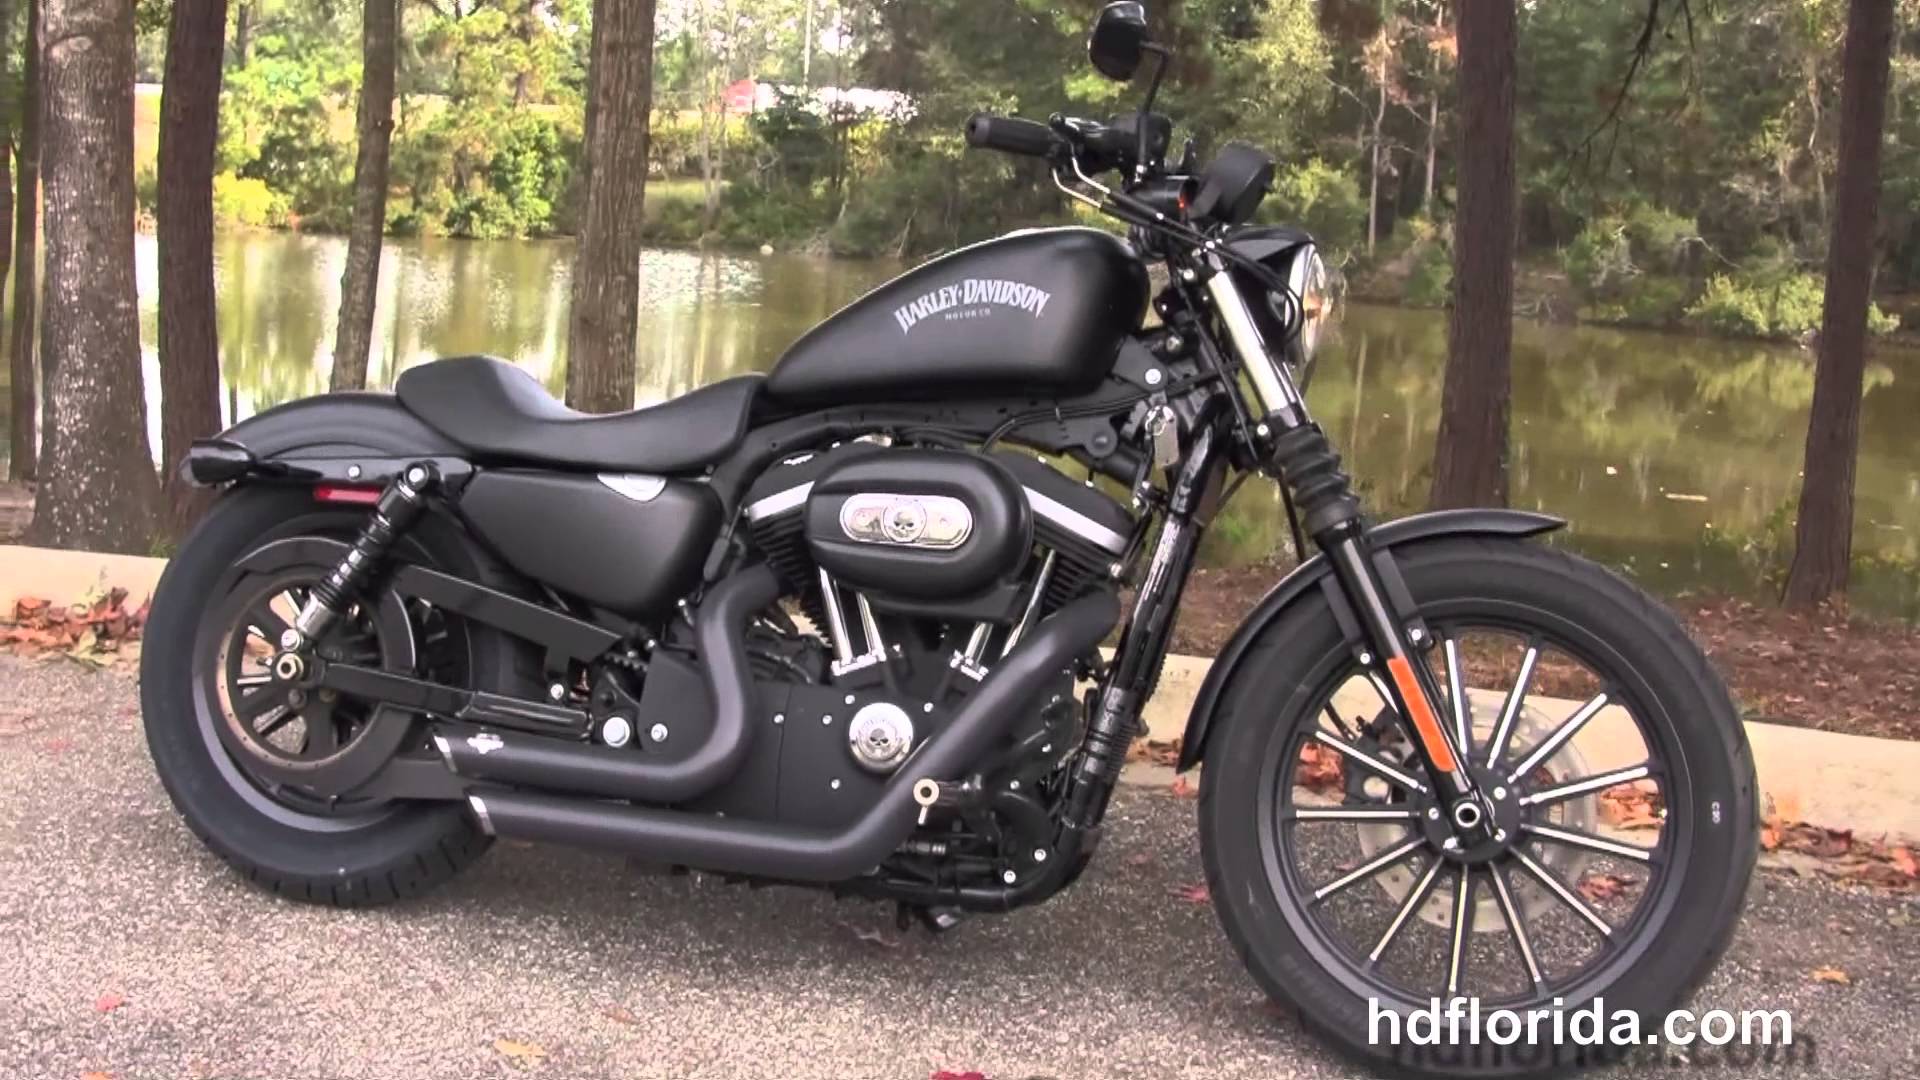 image For > Harley Davidson Iron 883 Blacked Out